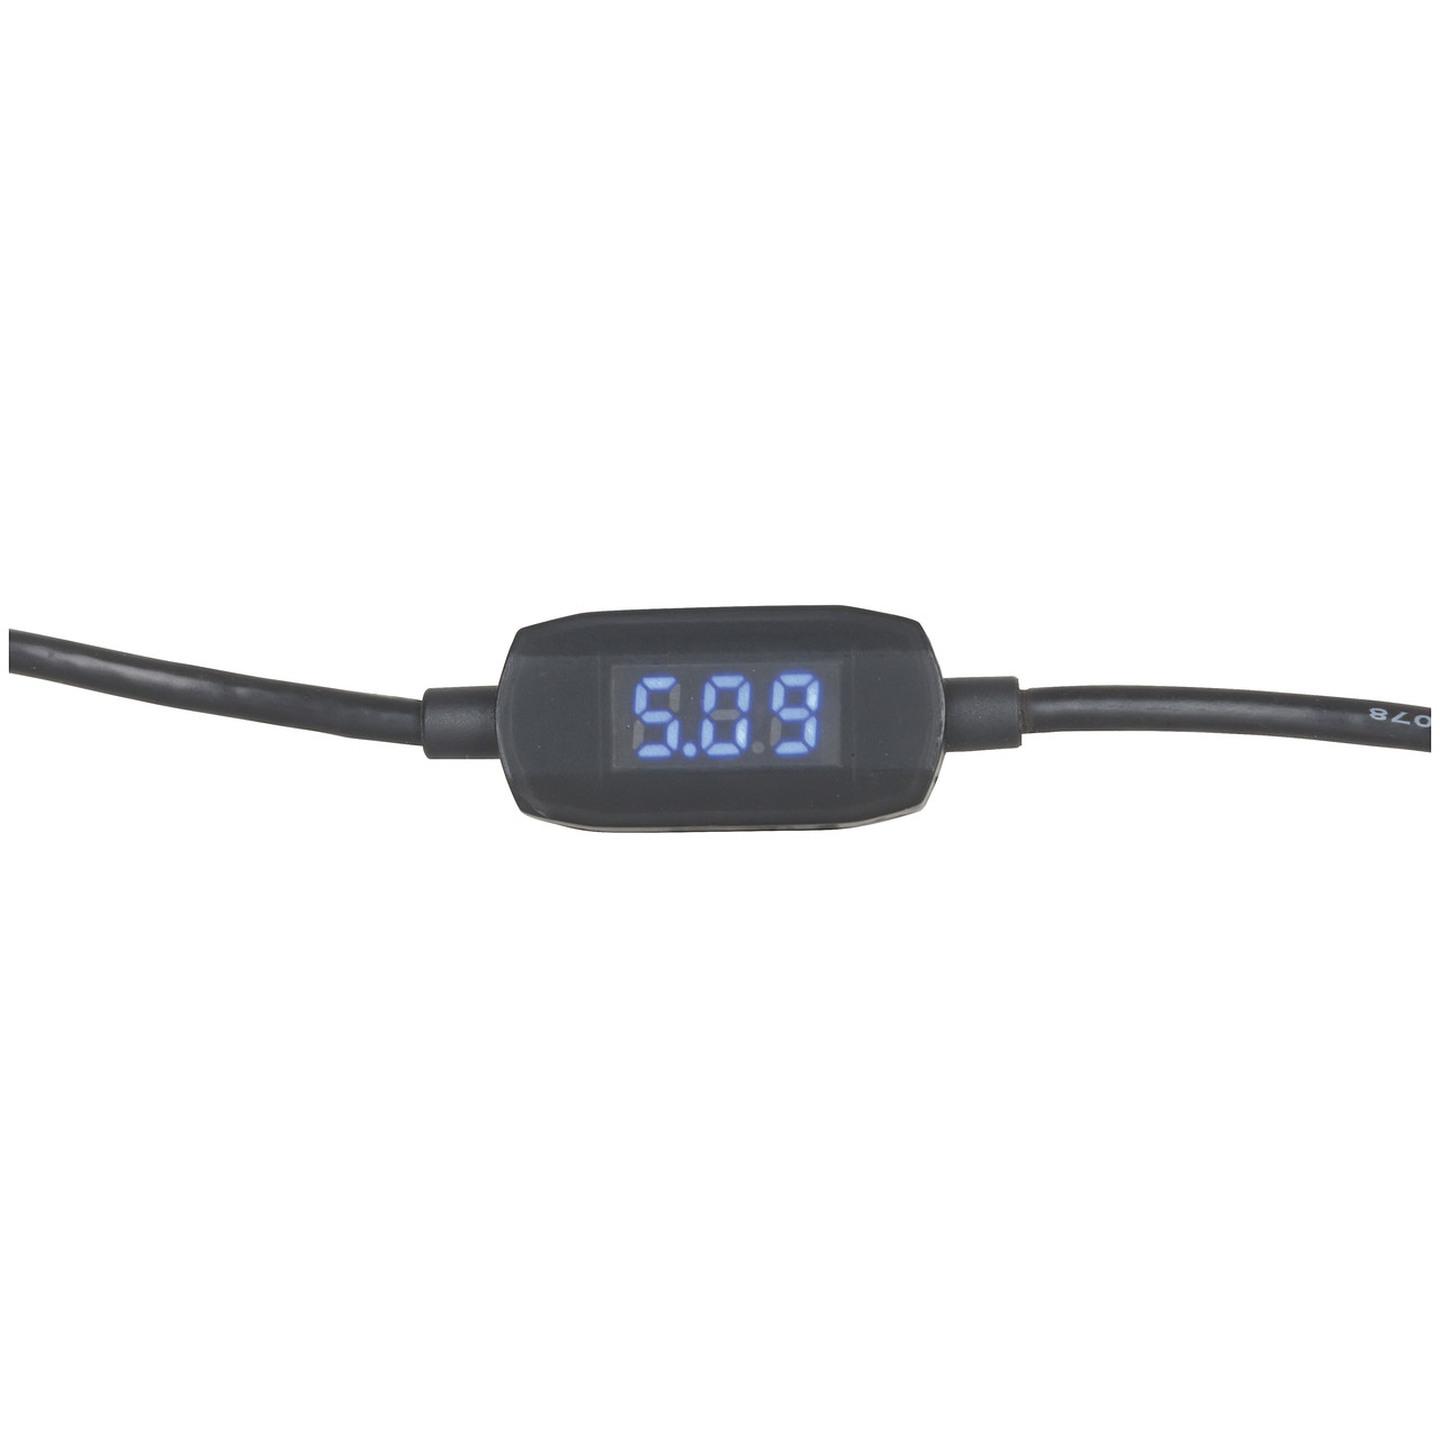 USB Power Meter with Current Display